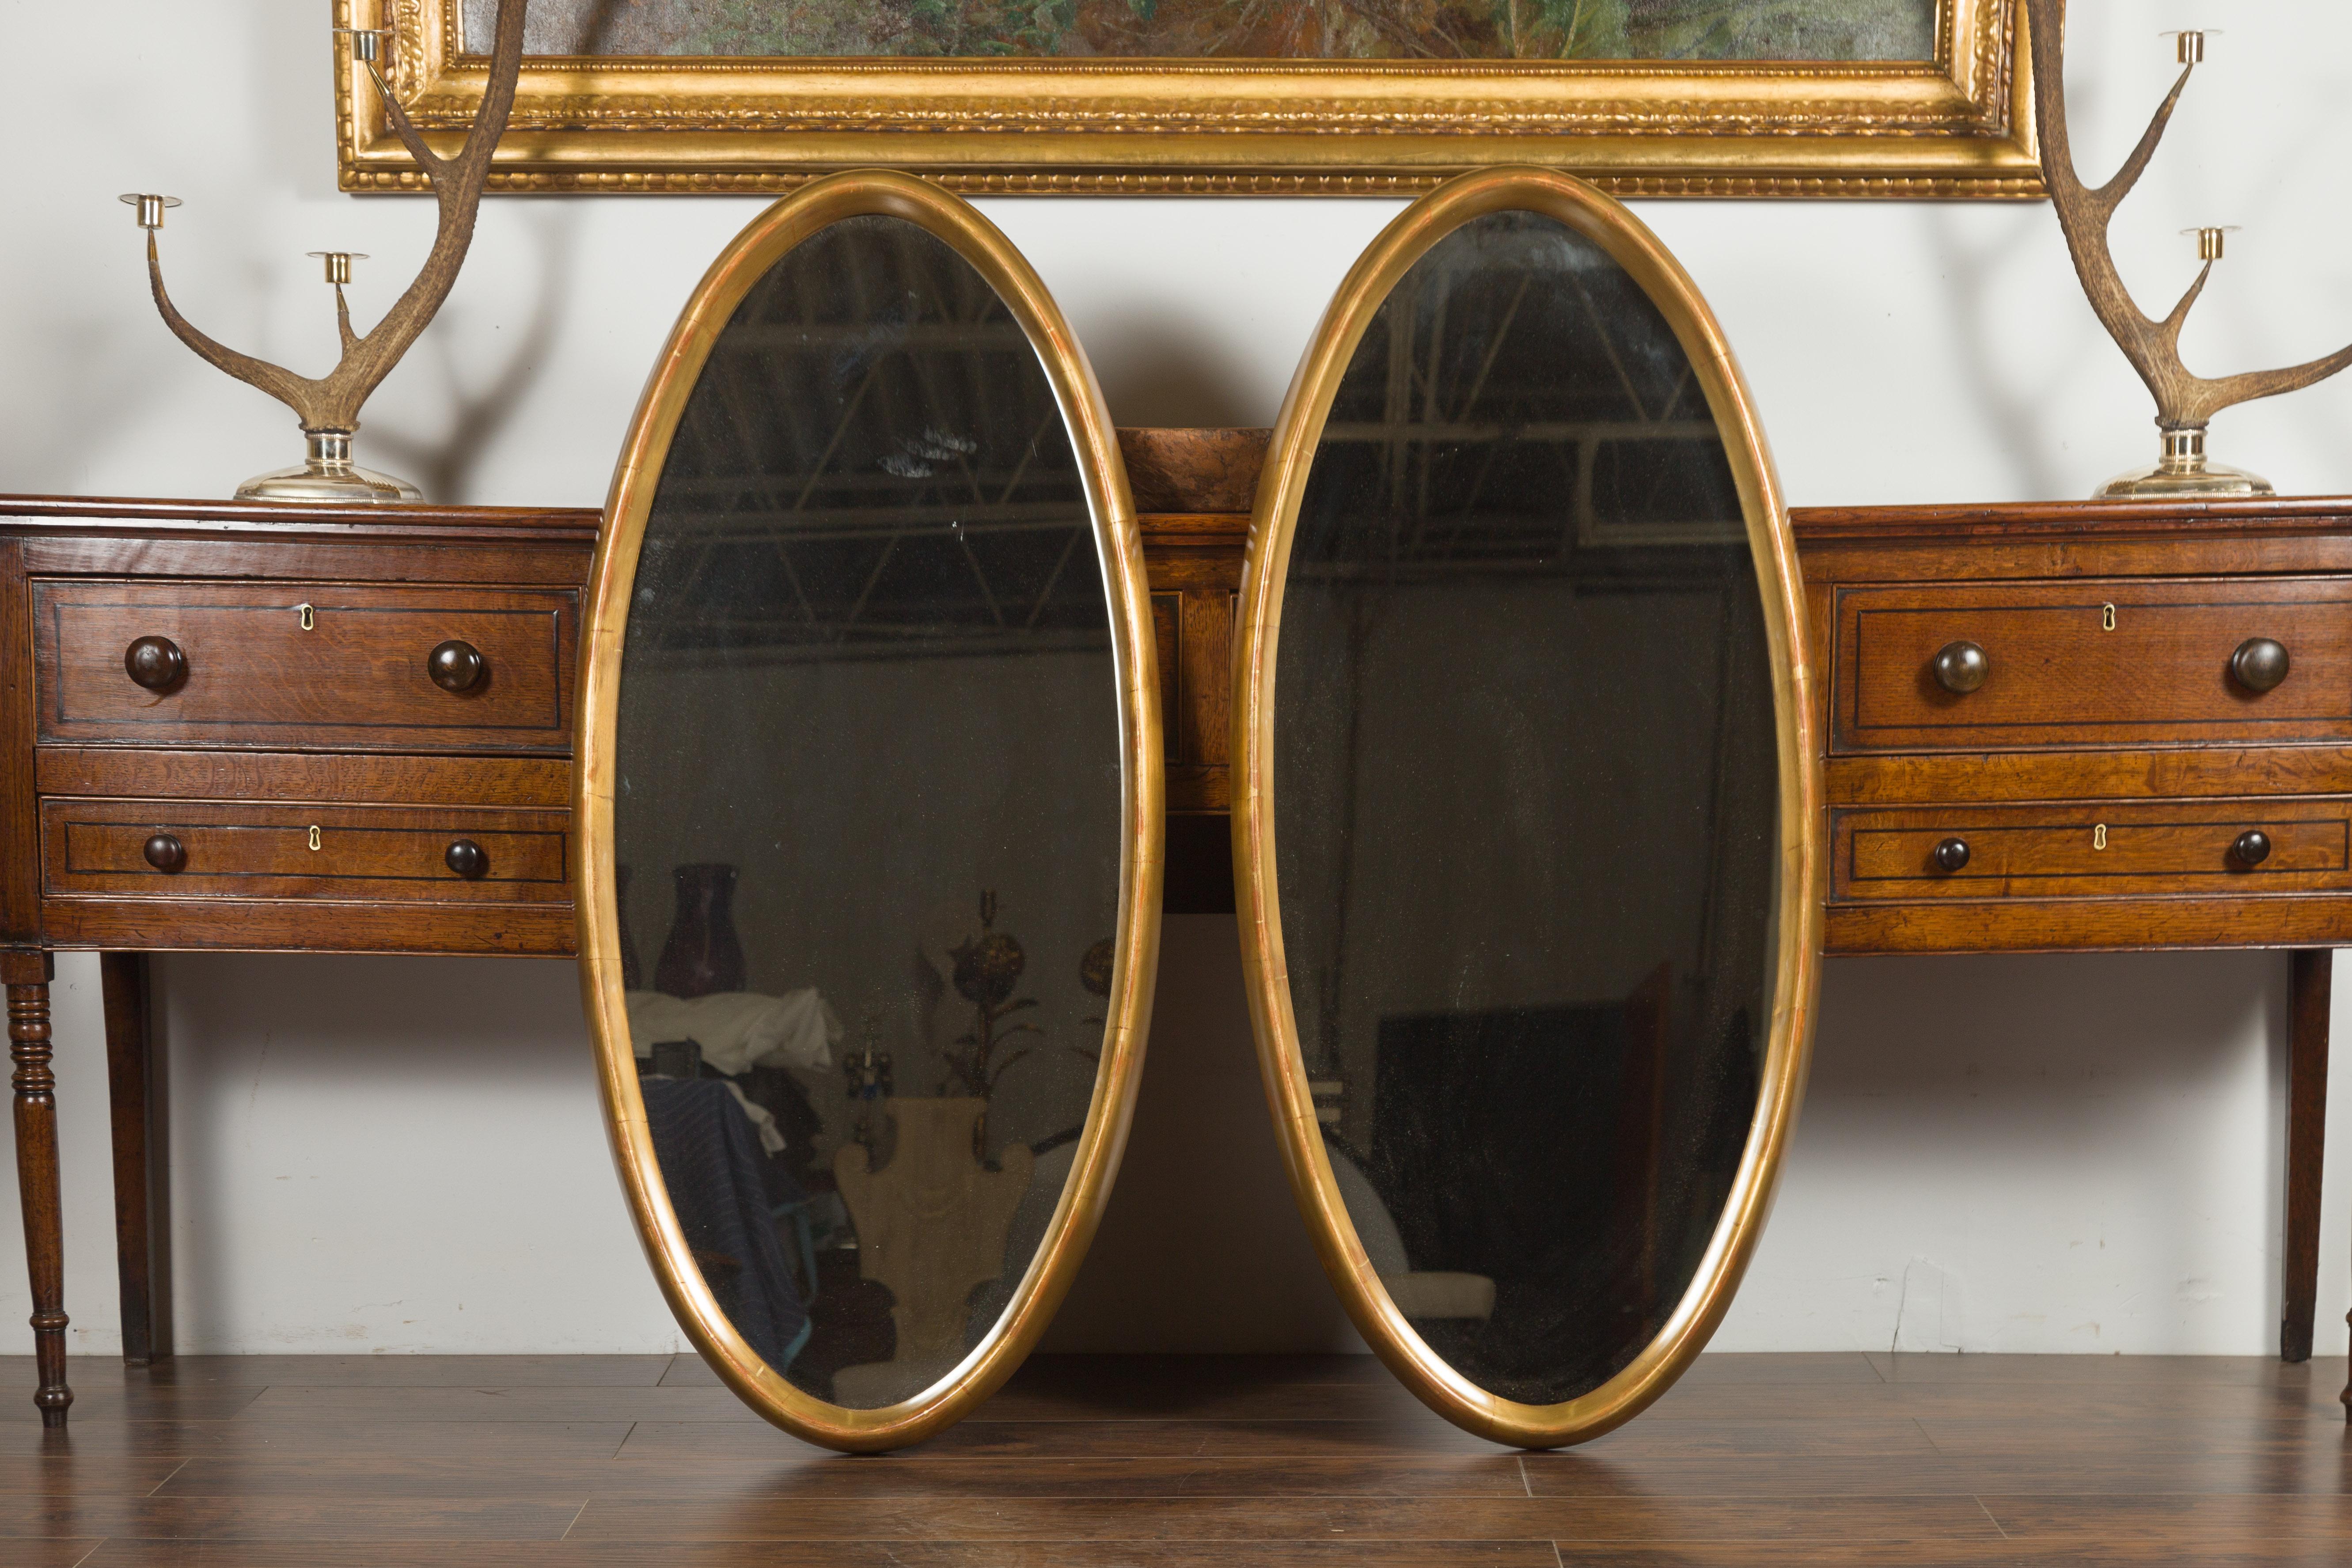 A pair of Italian vintage giltwood tall oval mirrors from the mid-20th century. Stylish and simple all in one breath, this pair of oval giltwood mirrors charms us with their clean lines and serene silhouette. Boasting a slight red undertone and each